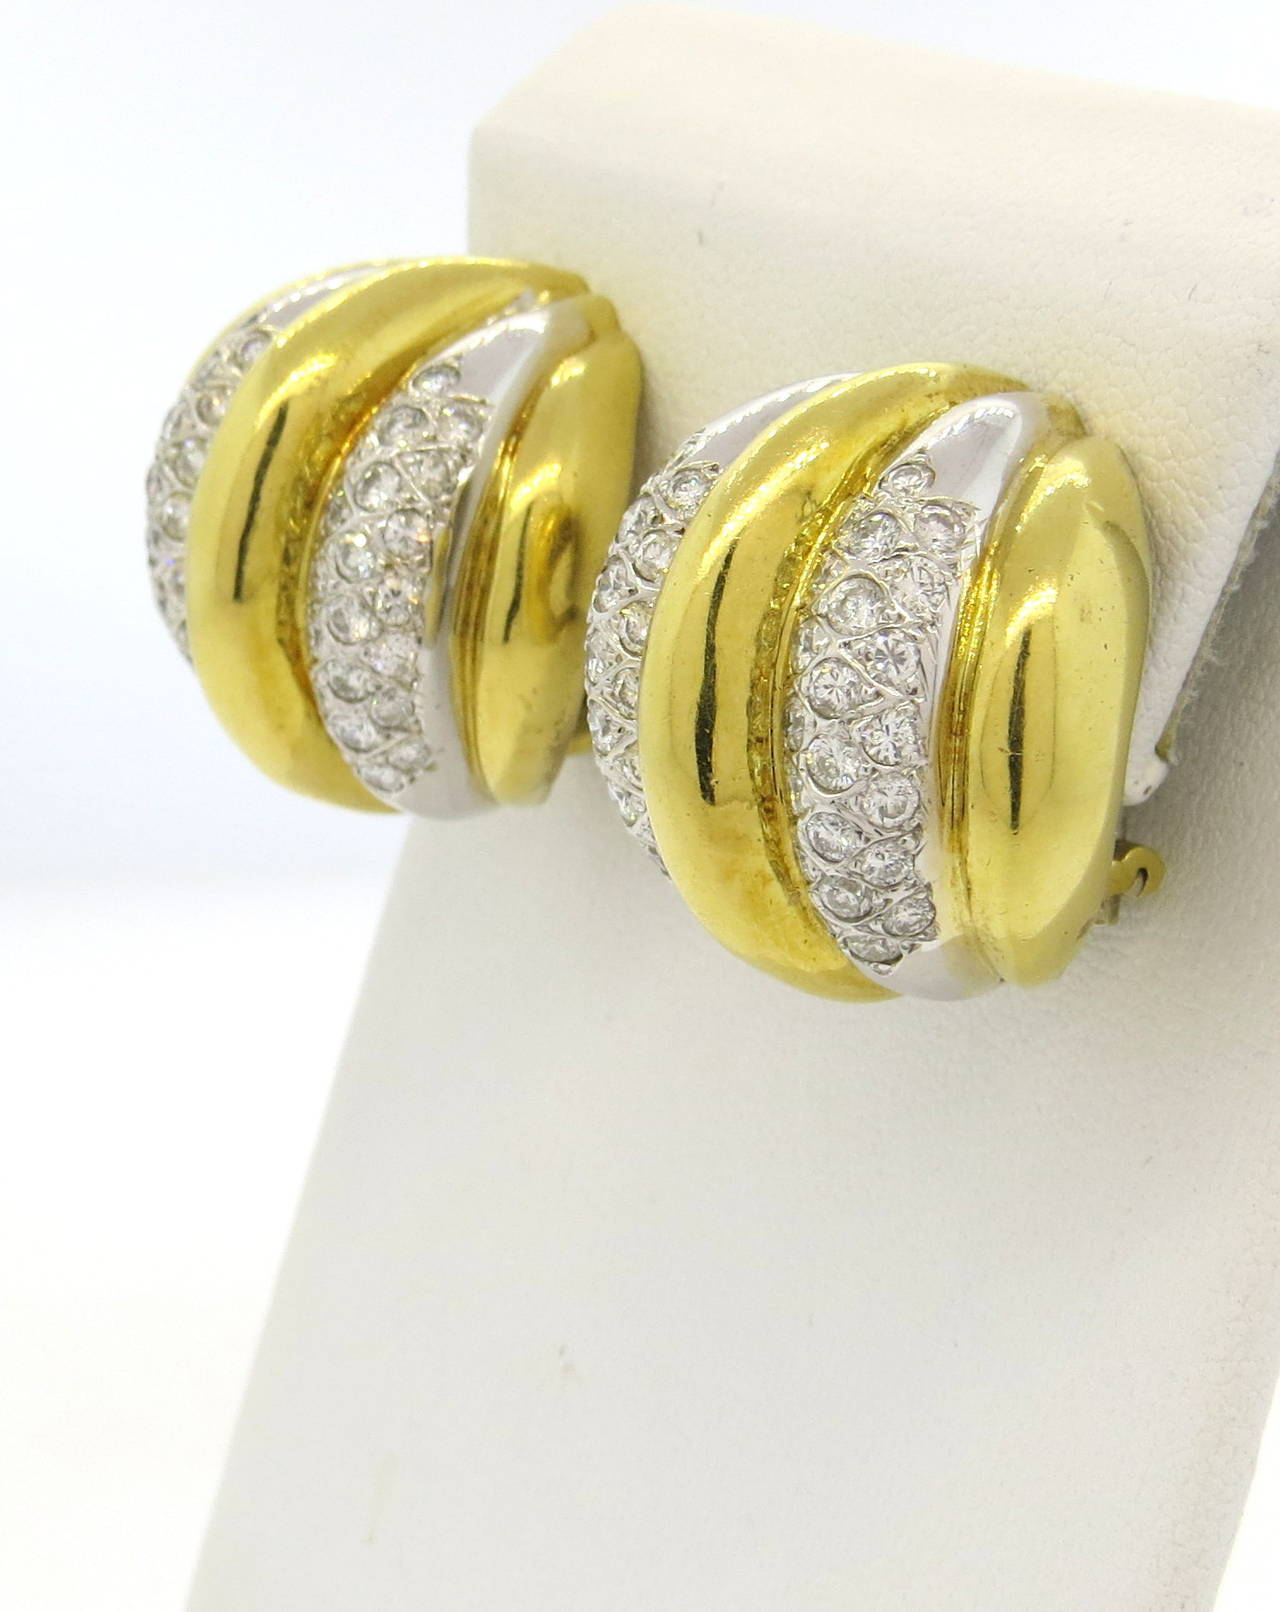 Massive 18k gold dome earrings, set with approximately 2.8ctw in diamonds. Earrings are 25mm x 25mm, and sit approx. 15mm from the ear. Weight - 39.3 grams